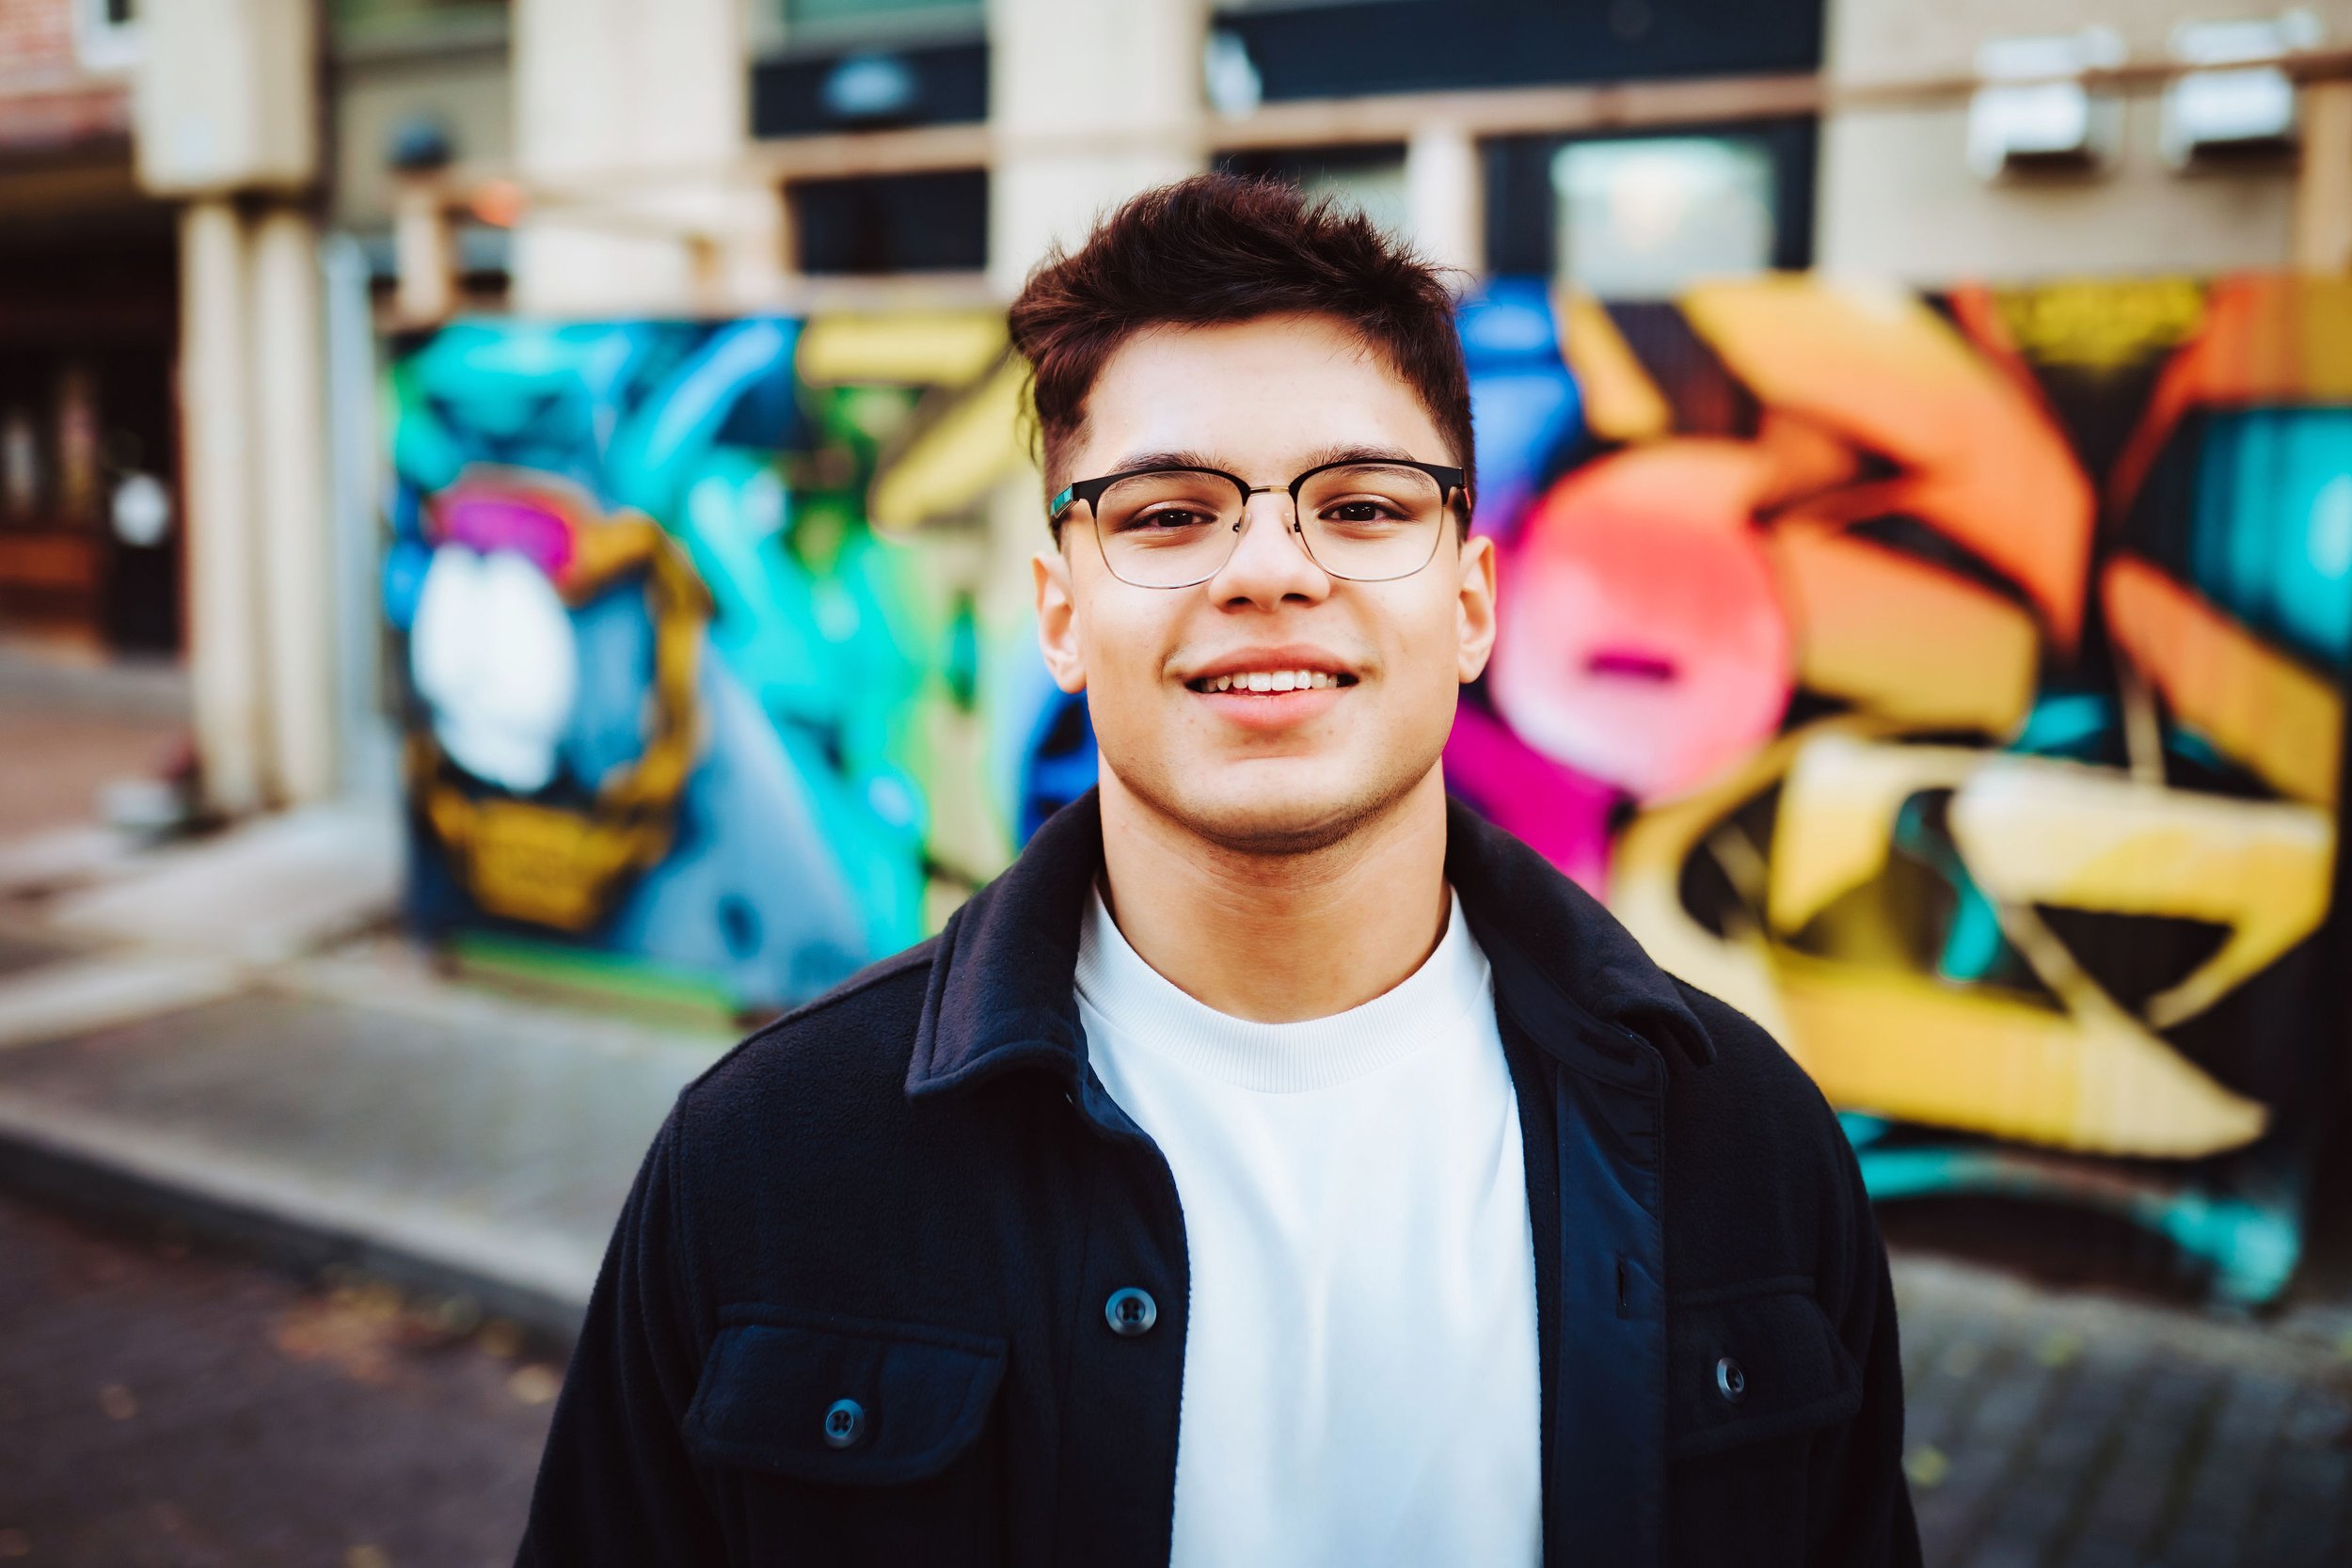 Senior boy smiling in front of colorful wall